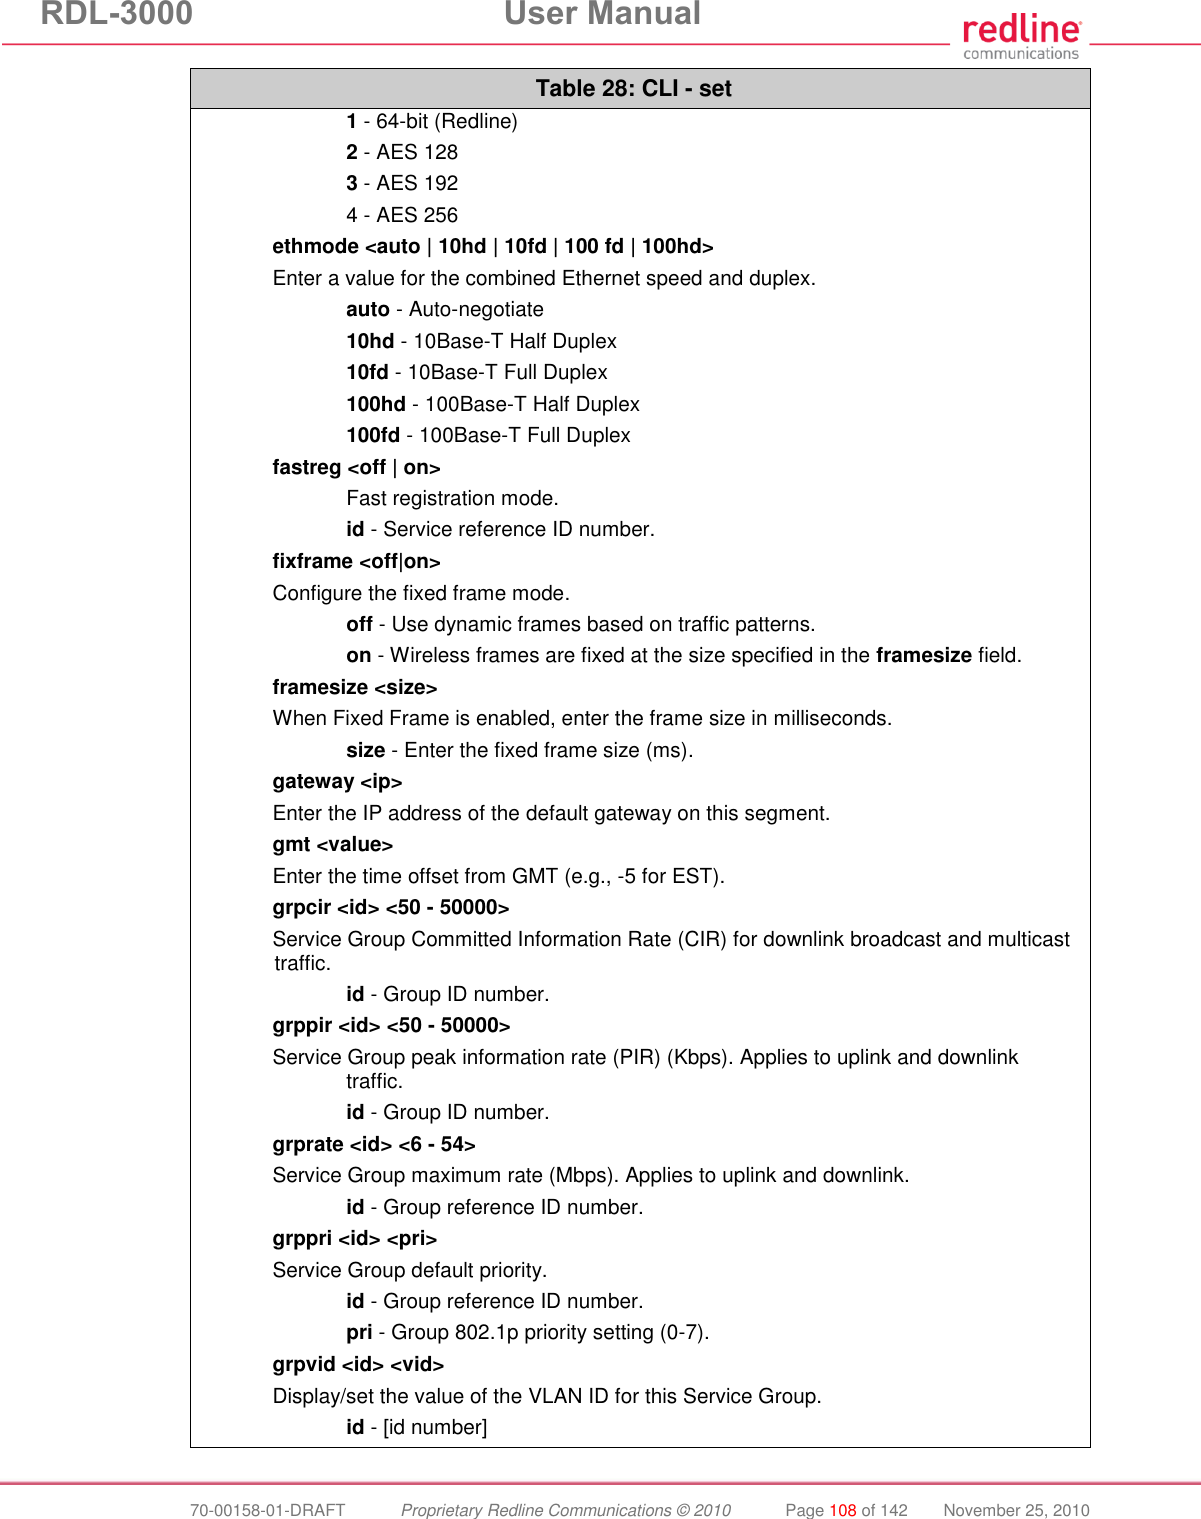 RDL-3000  User Manual  70-00158-01-DRAFT  Proprietary Redline Communications © 2010  Page 108 of 142  November 25, 2010 Table 28: CLI - set  1 - 64-bit (Redline)  2 - AES 128  3 - AES 192  4 - AES 256 ethmode &lt;auto | 10hd | 10fd | 100 fd | 100hd&gt; Enter a value for the combined Ethernet speed and duplex.  auto - Auto-negotiate  10hd - 10Base-T Half Duplex  10fd - 10Base-T Full Duplex  100hd - 100Base-T Half Duplex  100fd - 100Base-T Full Duplex fastreg &lt;off | on&gt;   Fast registration mode.  id - Service reference ID number. fixframe &lt;off|on&gt; Configure the fixed frame mode.  off - Use dynamic frames based on traffic patterns.  on - Wireless frames are fixed at the size specified in the framesize field. framesize &lt;size&gt; When Fixed Frame is enabled, enter the frame size in milliseconds.  size - Enter the fixed frame size (ms). gateway &lt;ip&gt; Enter the IP address of the default gateway on this segment. gmt &lt;value&gt; Enter the time offset from GMT (e.g., -5 for EST). grpcir &lt;id&gt; &lt;50 - 50000&gt; Service Group Committed Information Rate (CIR) for downlink broadcast and multicast traffic.  id - Group ID number. grppir &lt;id&gt; &lt;50 - 50000&gt; Service Group peak information rate (PIR) (Kbps). Applies to uplink and downlink traffic.  id - Group ID number. grprate &lt;id&gt; &lt;6 - 54&gt; Service Group maximum rate (Mbps). Applies to uplink and downlink.  id - Group reference ID number. grppri &lt;id&gt; &lt;pri&gt; Service Group default priority.  id - Group reference ID number.  pri - Group 802.1p priority setting (0-7). grpvid &lt;id&gt; &lt;vid&gt; Display/set the value of the VLAN ID for this Service Group.  id - [id number] 